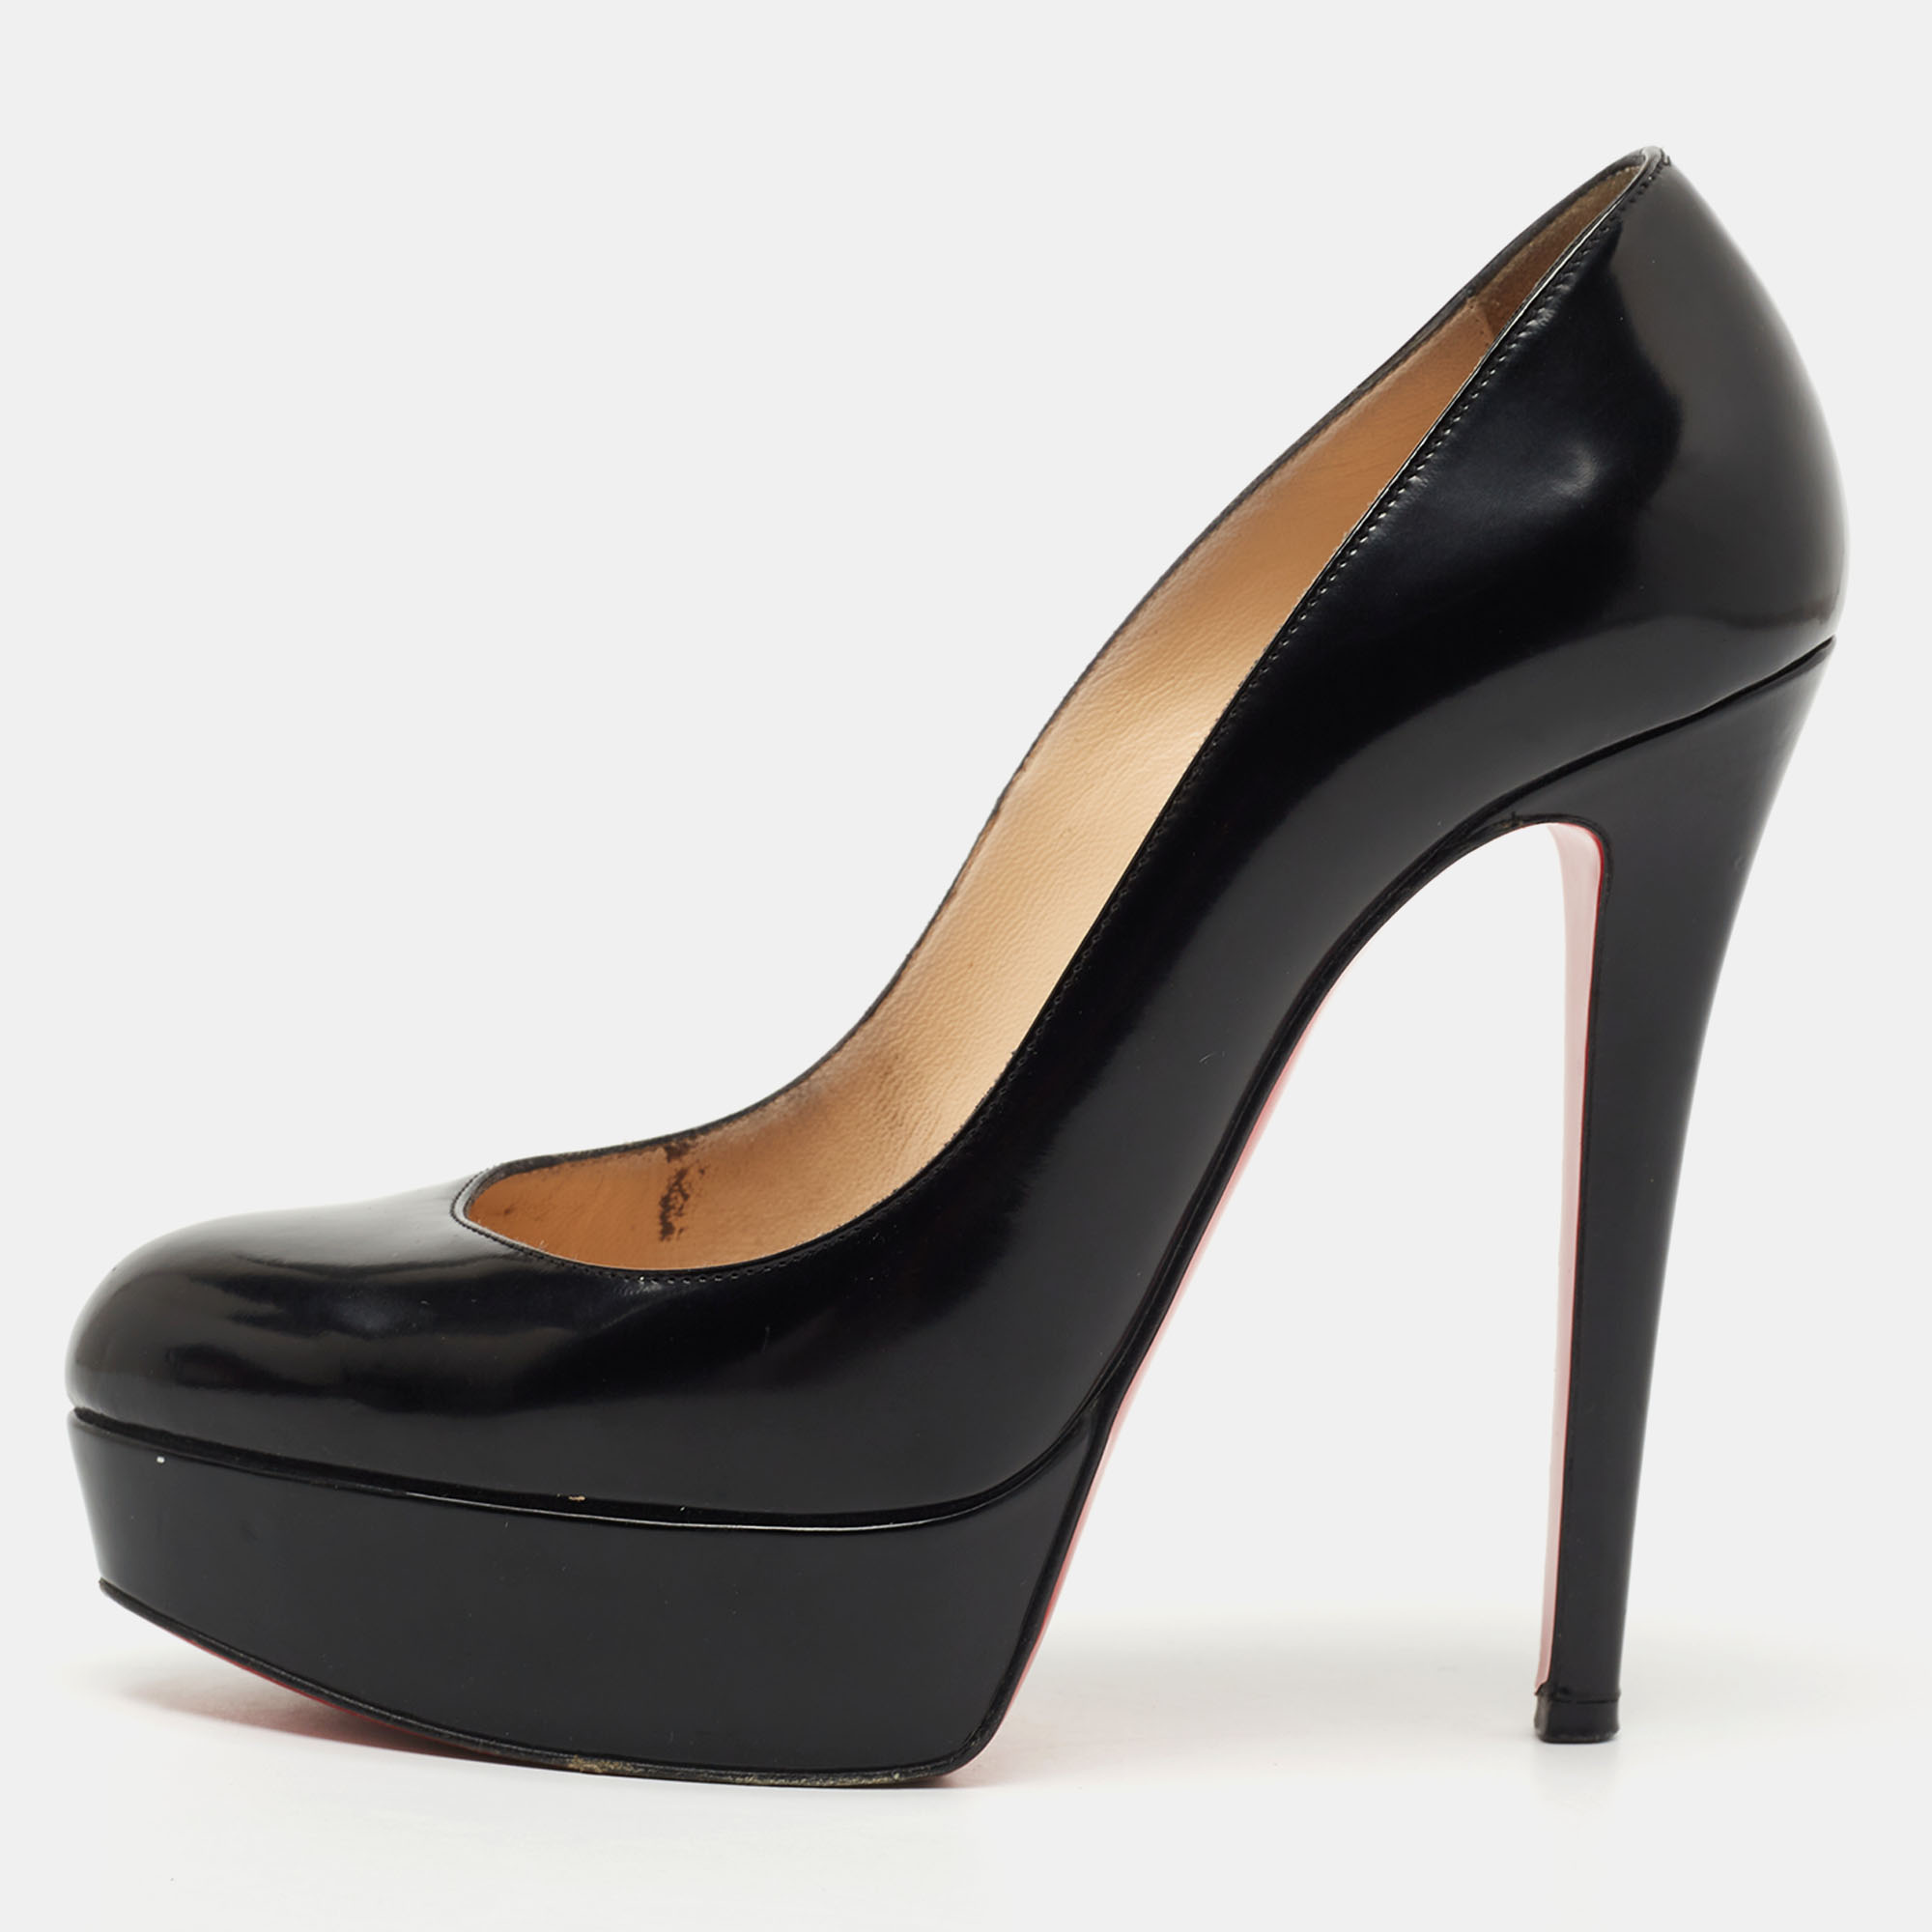 Pre-owned Christian Louboutin Black Leather Bianca Pumps Size 36